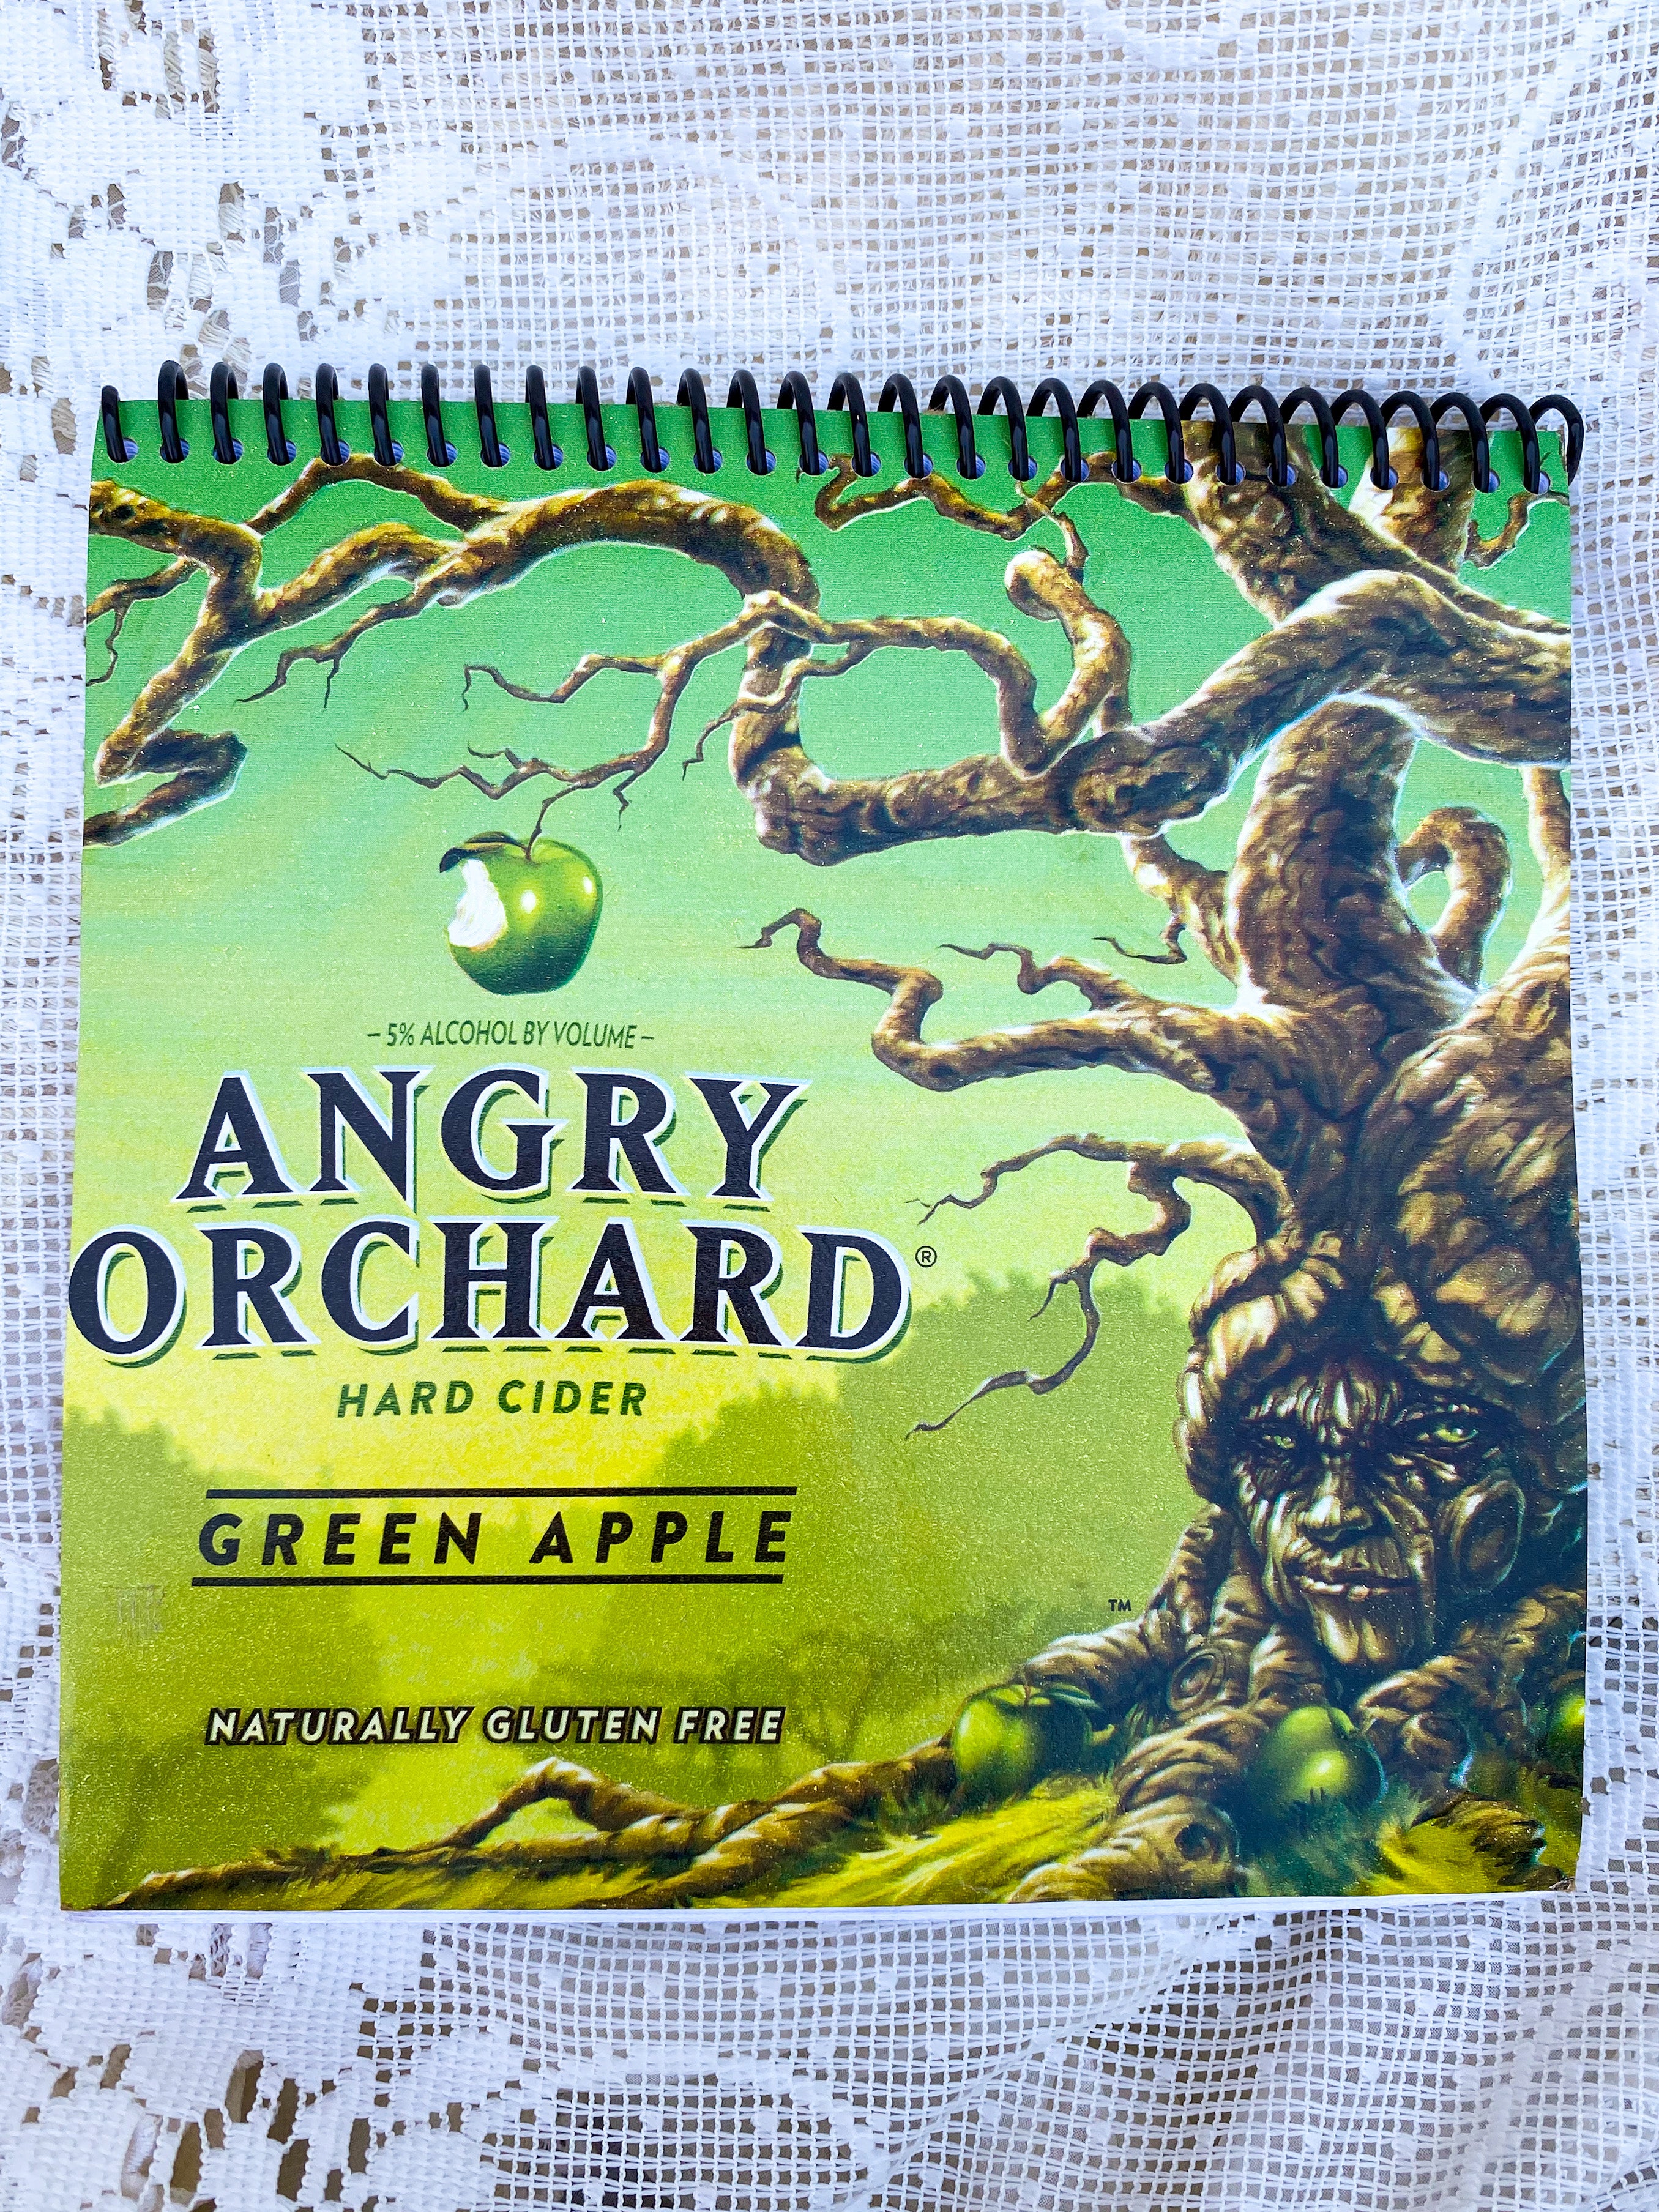 Angry Orchard Green Apple Recycled Beer Carton Notebook - Black Spiral